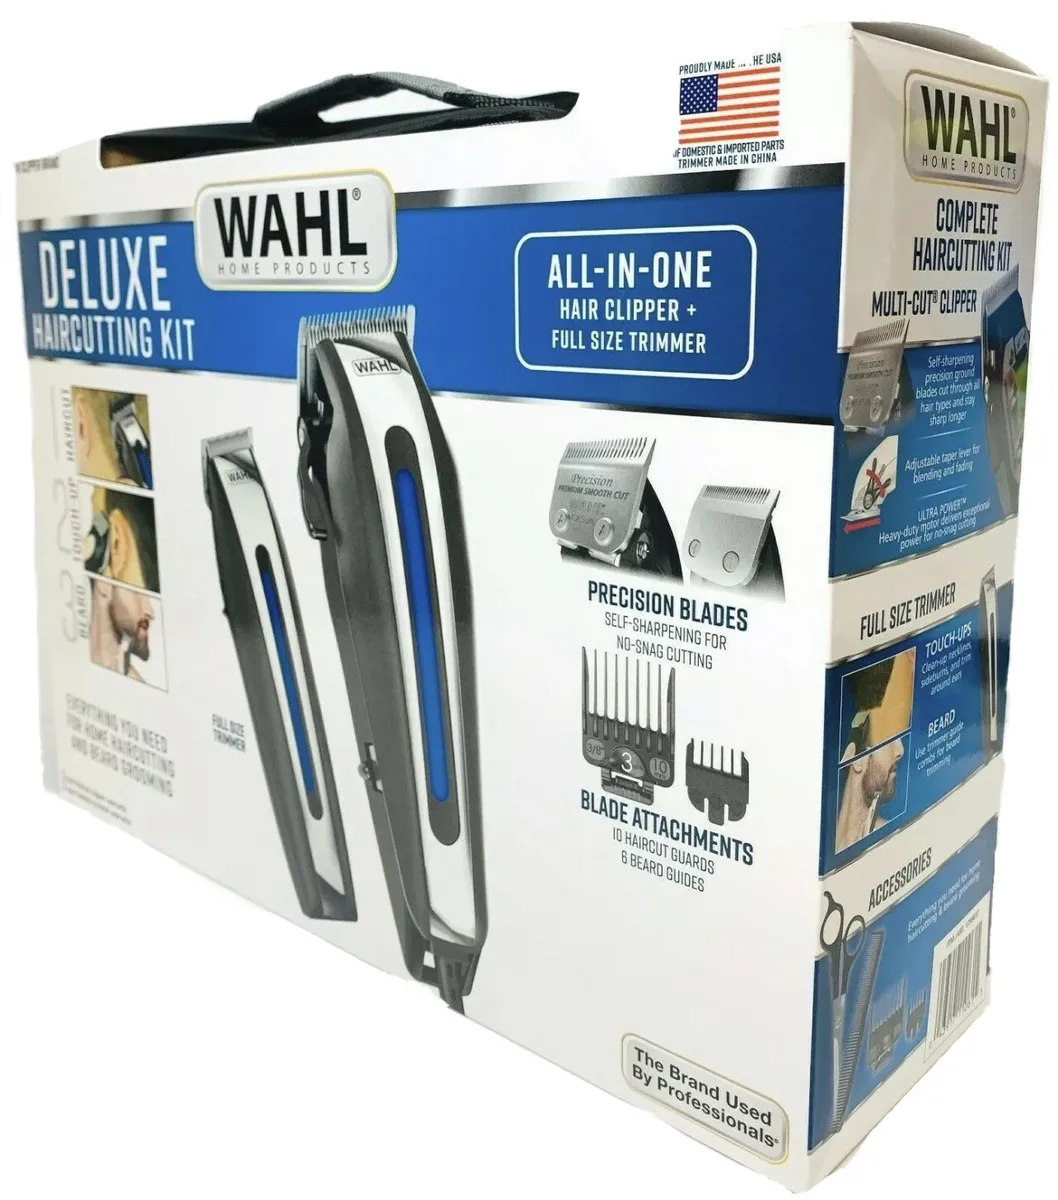 Wahl Deluxe Complete Hair Cutting Kit All in One, New! 43917110615 eBay